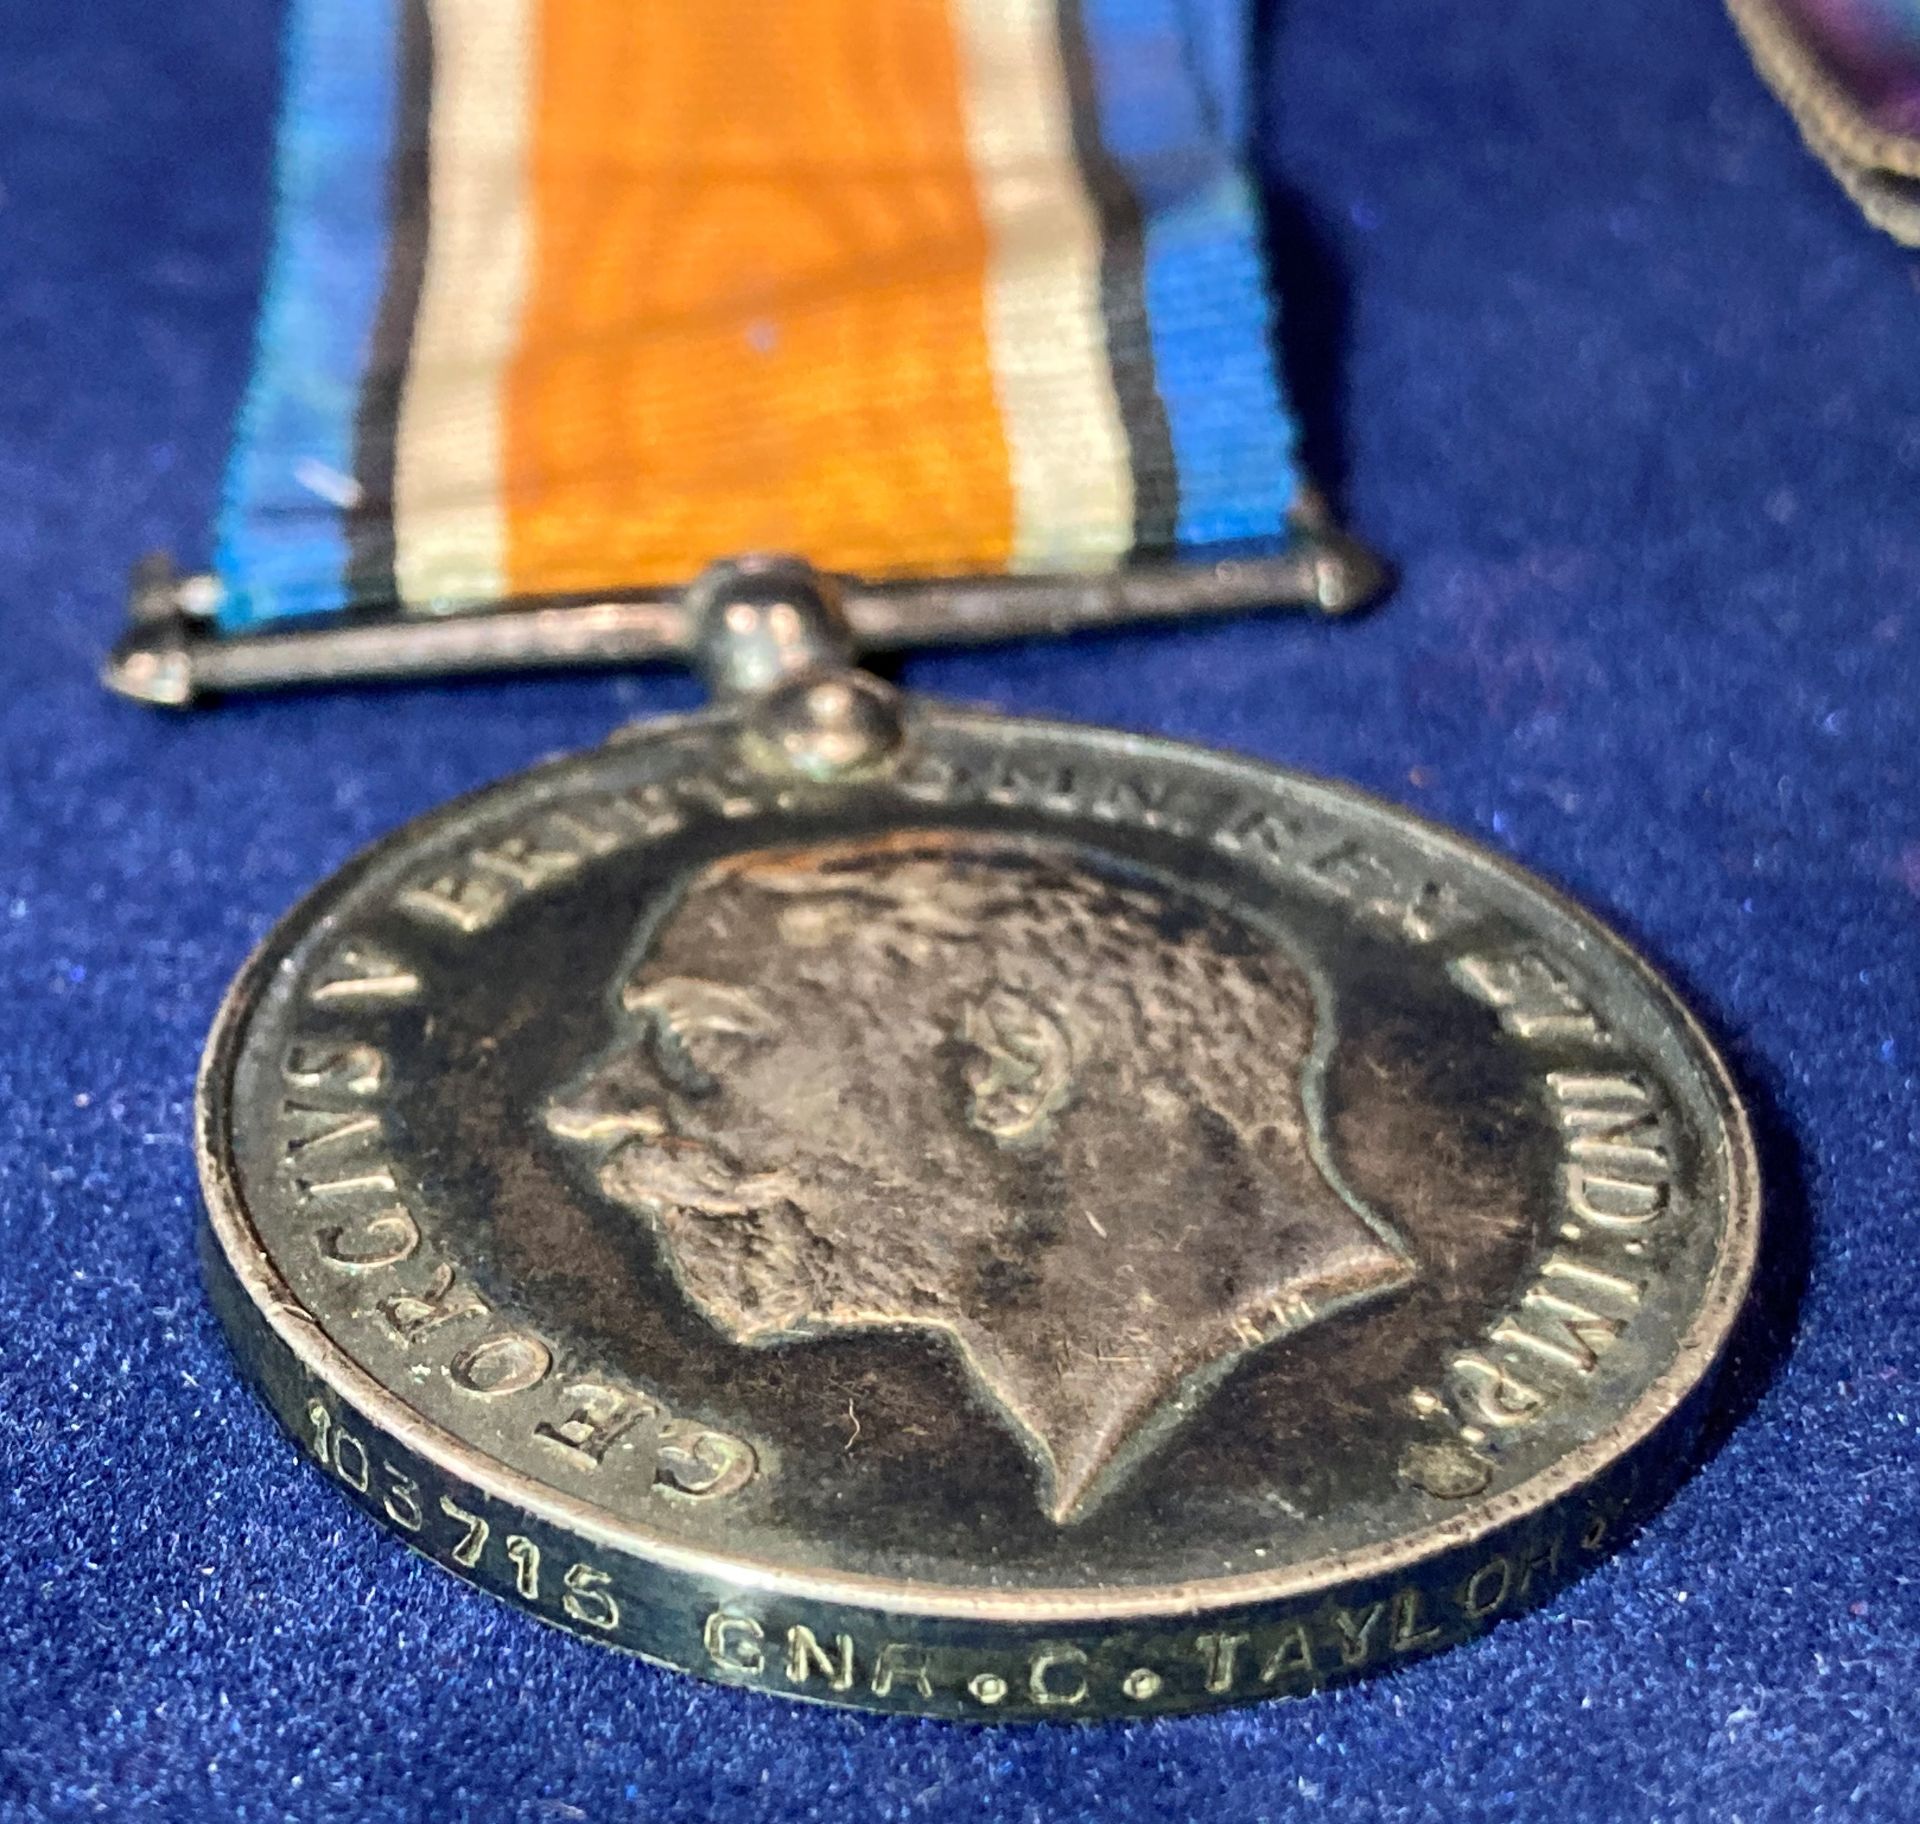 Two First World War Medals - 1914-1918 British War Medal and 1914-1919 Victory Medal both with - Image 2 of 3